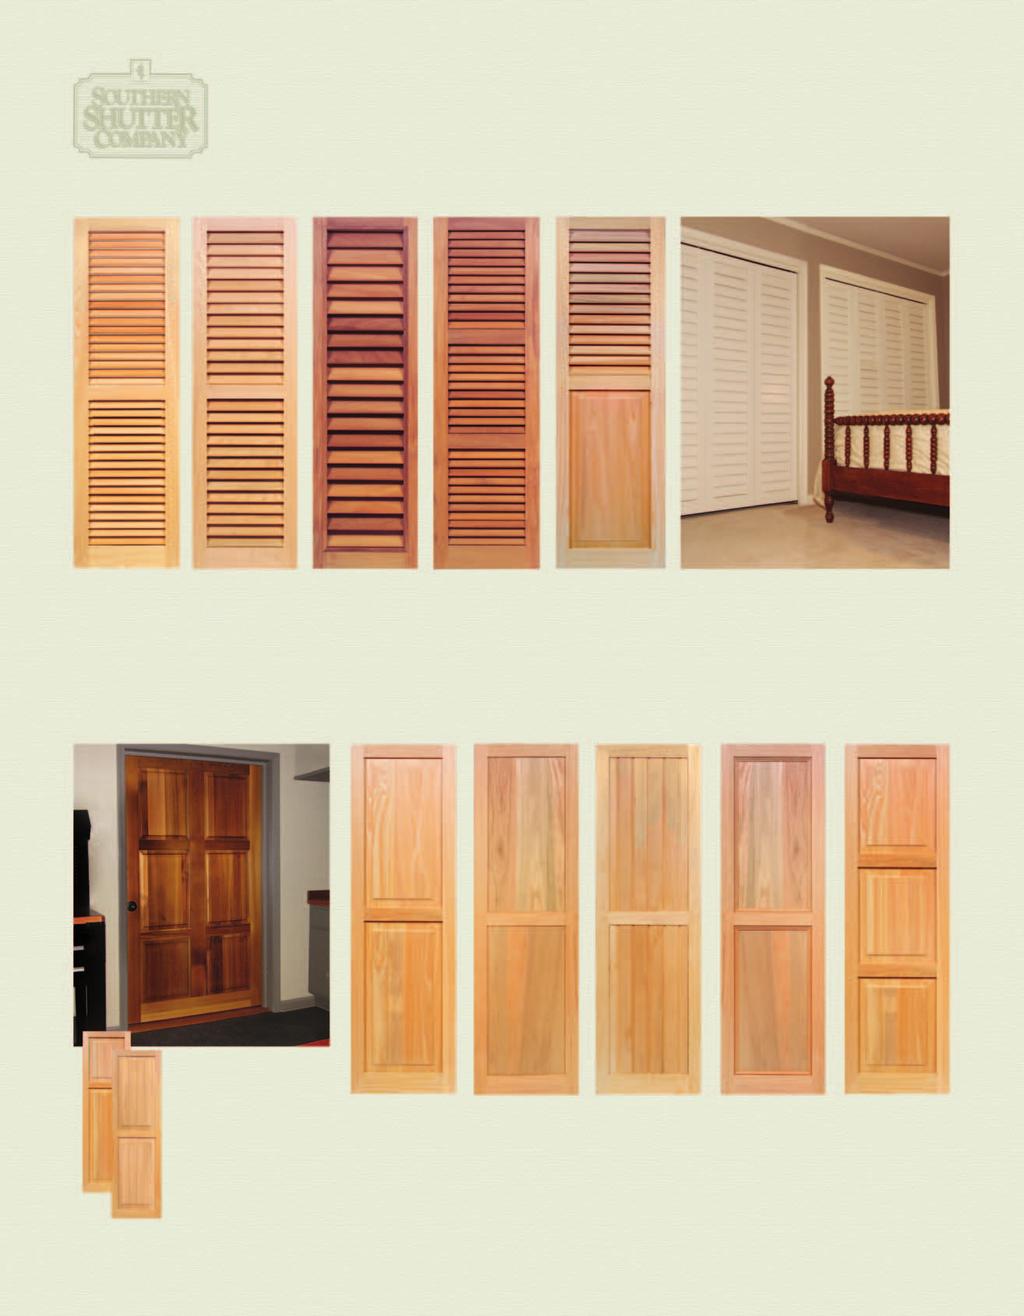 DESIGNLINE SHUTTERS Interior s Interior s with Variable Fixed s Fixed 1-7/8 Slats & Fixed 2-1/2 Slats & Fixed 3-1/2 Slats & Decorative Trim Fixed 3 Equal Section Rail Placement Fixed Over Combination